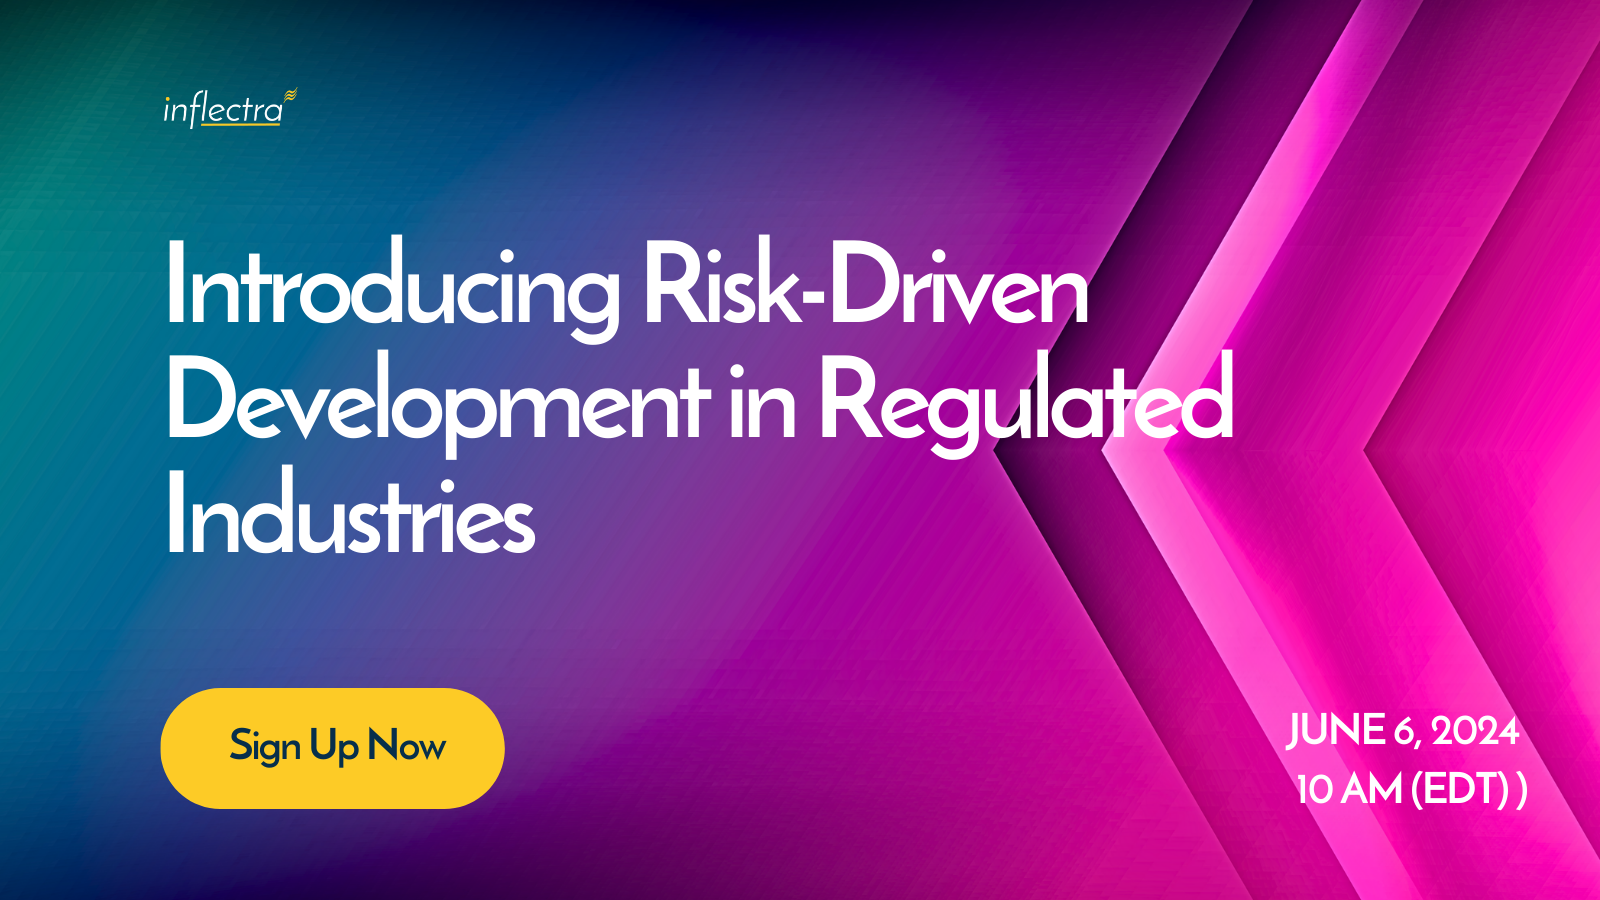 A webinar titled “Introducing Risk-Driven Development in Regulated Industries”. The text also includes a date and time for the webinar, June 6, 2024 at 10:00 AM EDT and a button to sign up.